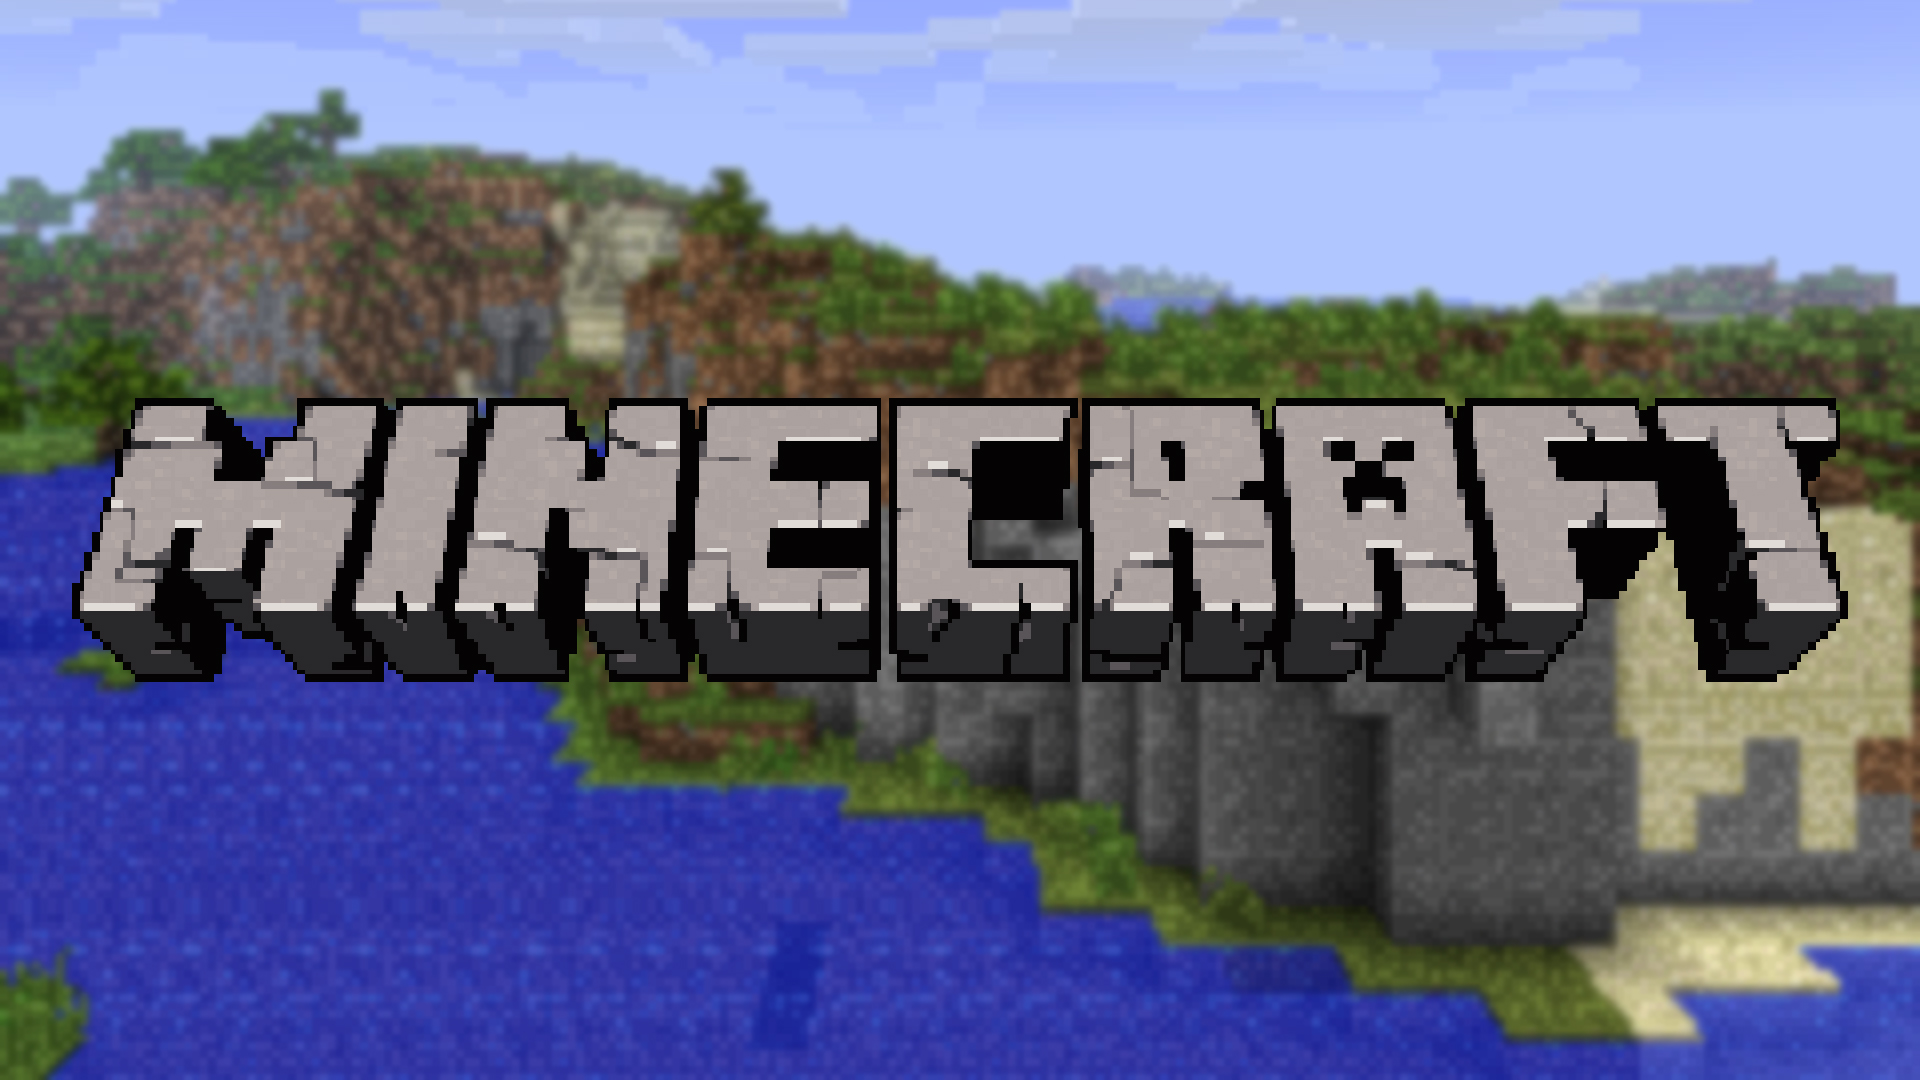 Minecraft 1.16.4 Has Officially Switched From Pre-Release Versions to It’s First Release Candidate!